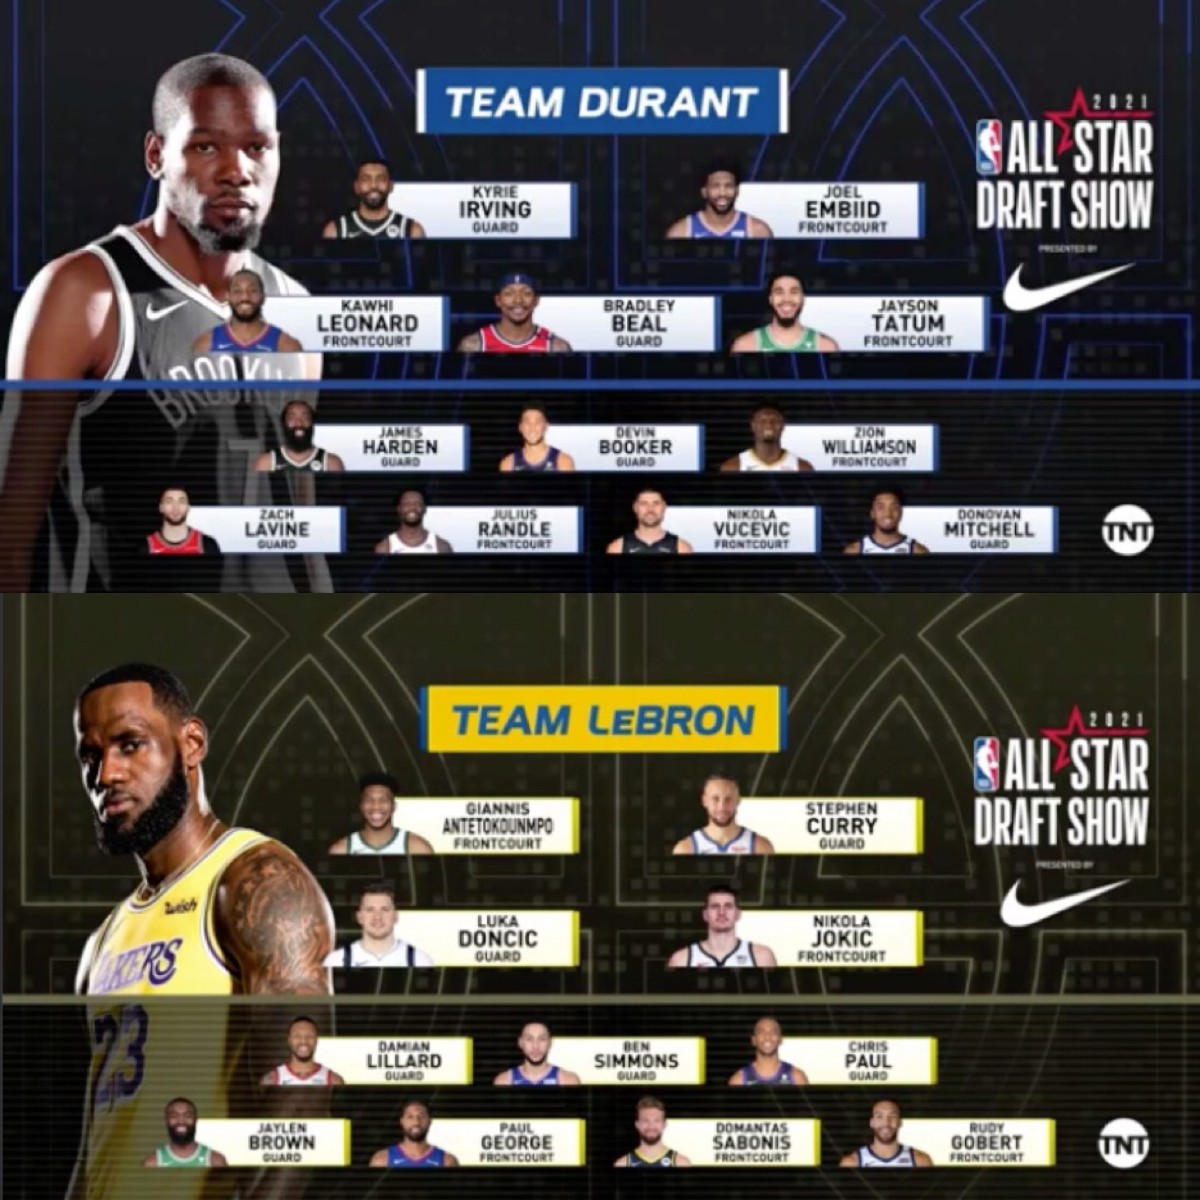 Team Durant (above) and Team Lebron (below) will play Sunday night. (Mike Conley will replace injured Devin Booker) 